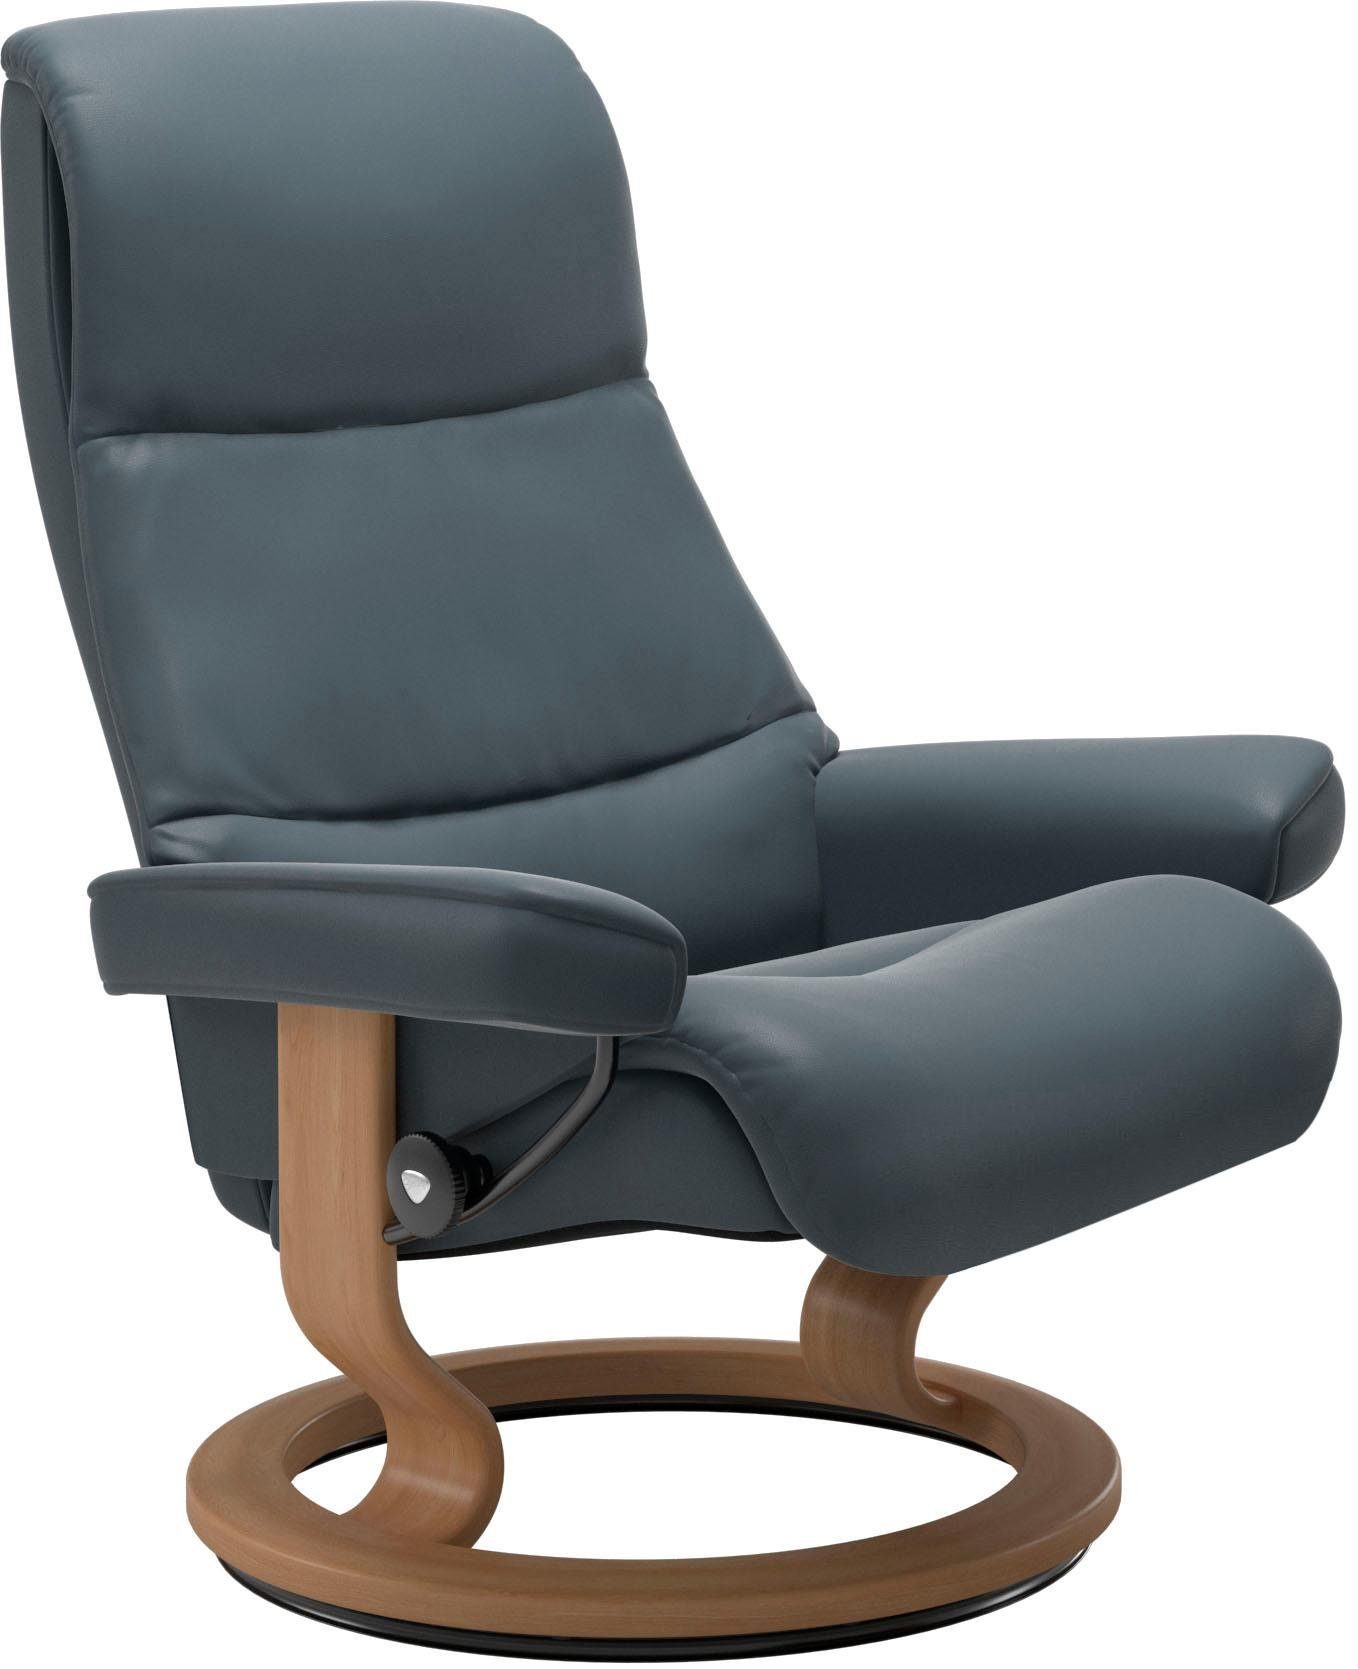 Stressless® Relaxsessel View, mit Classic Base, Größe L,Gestell Eiche | Funktionssessel